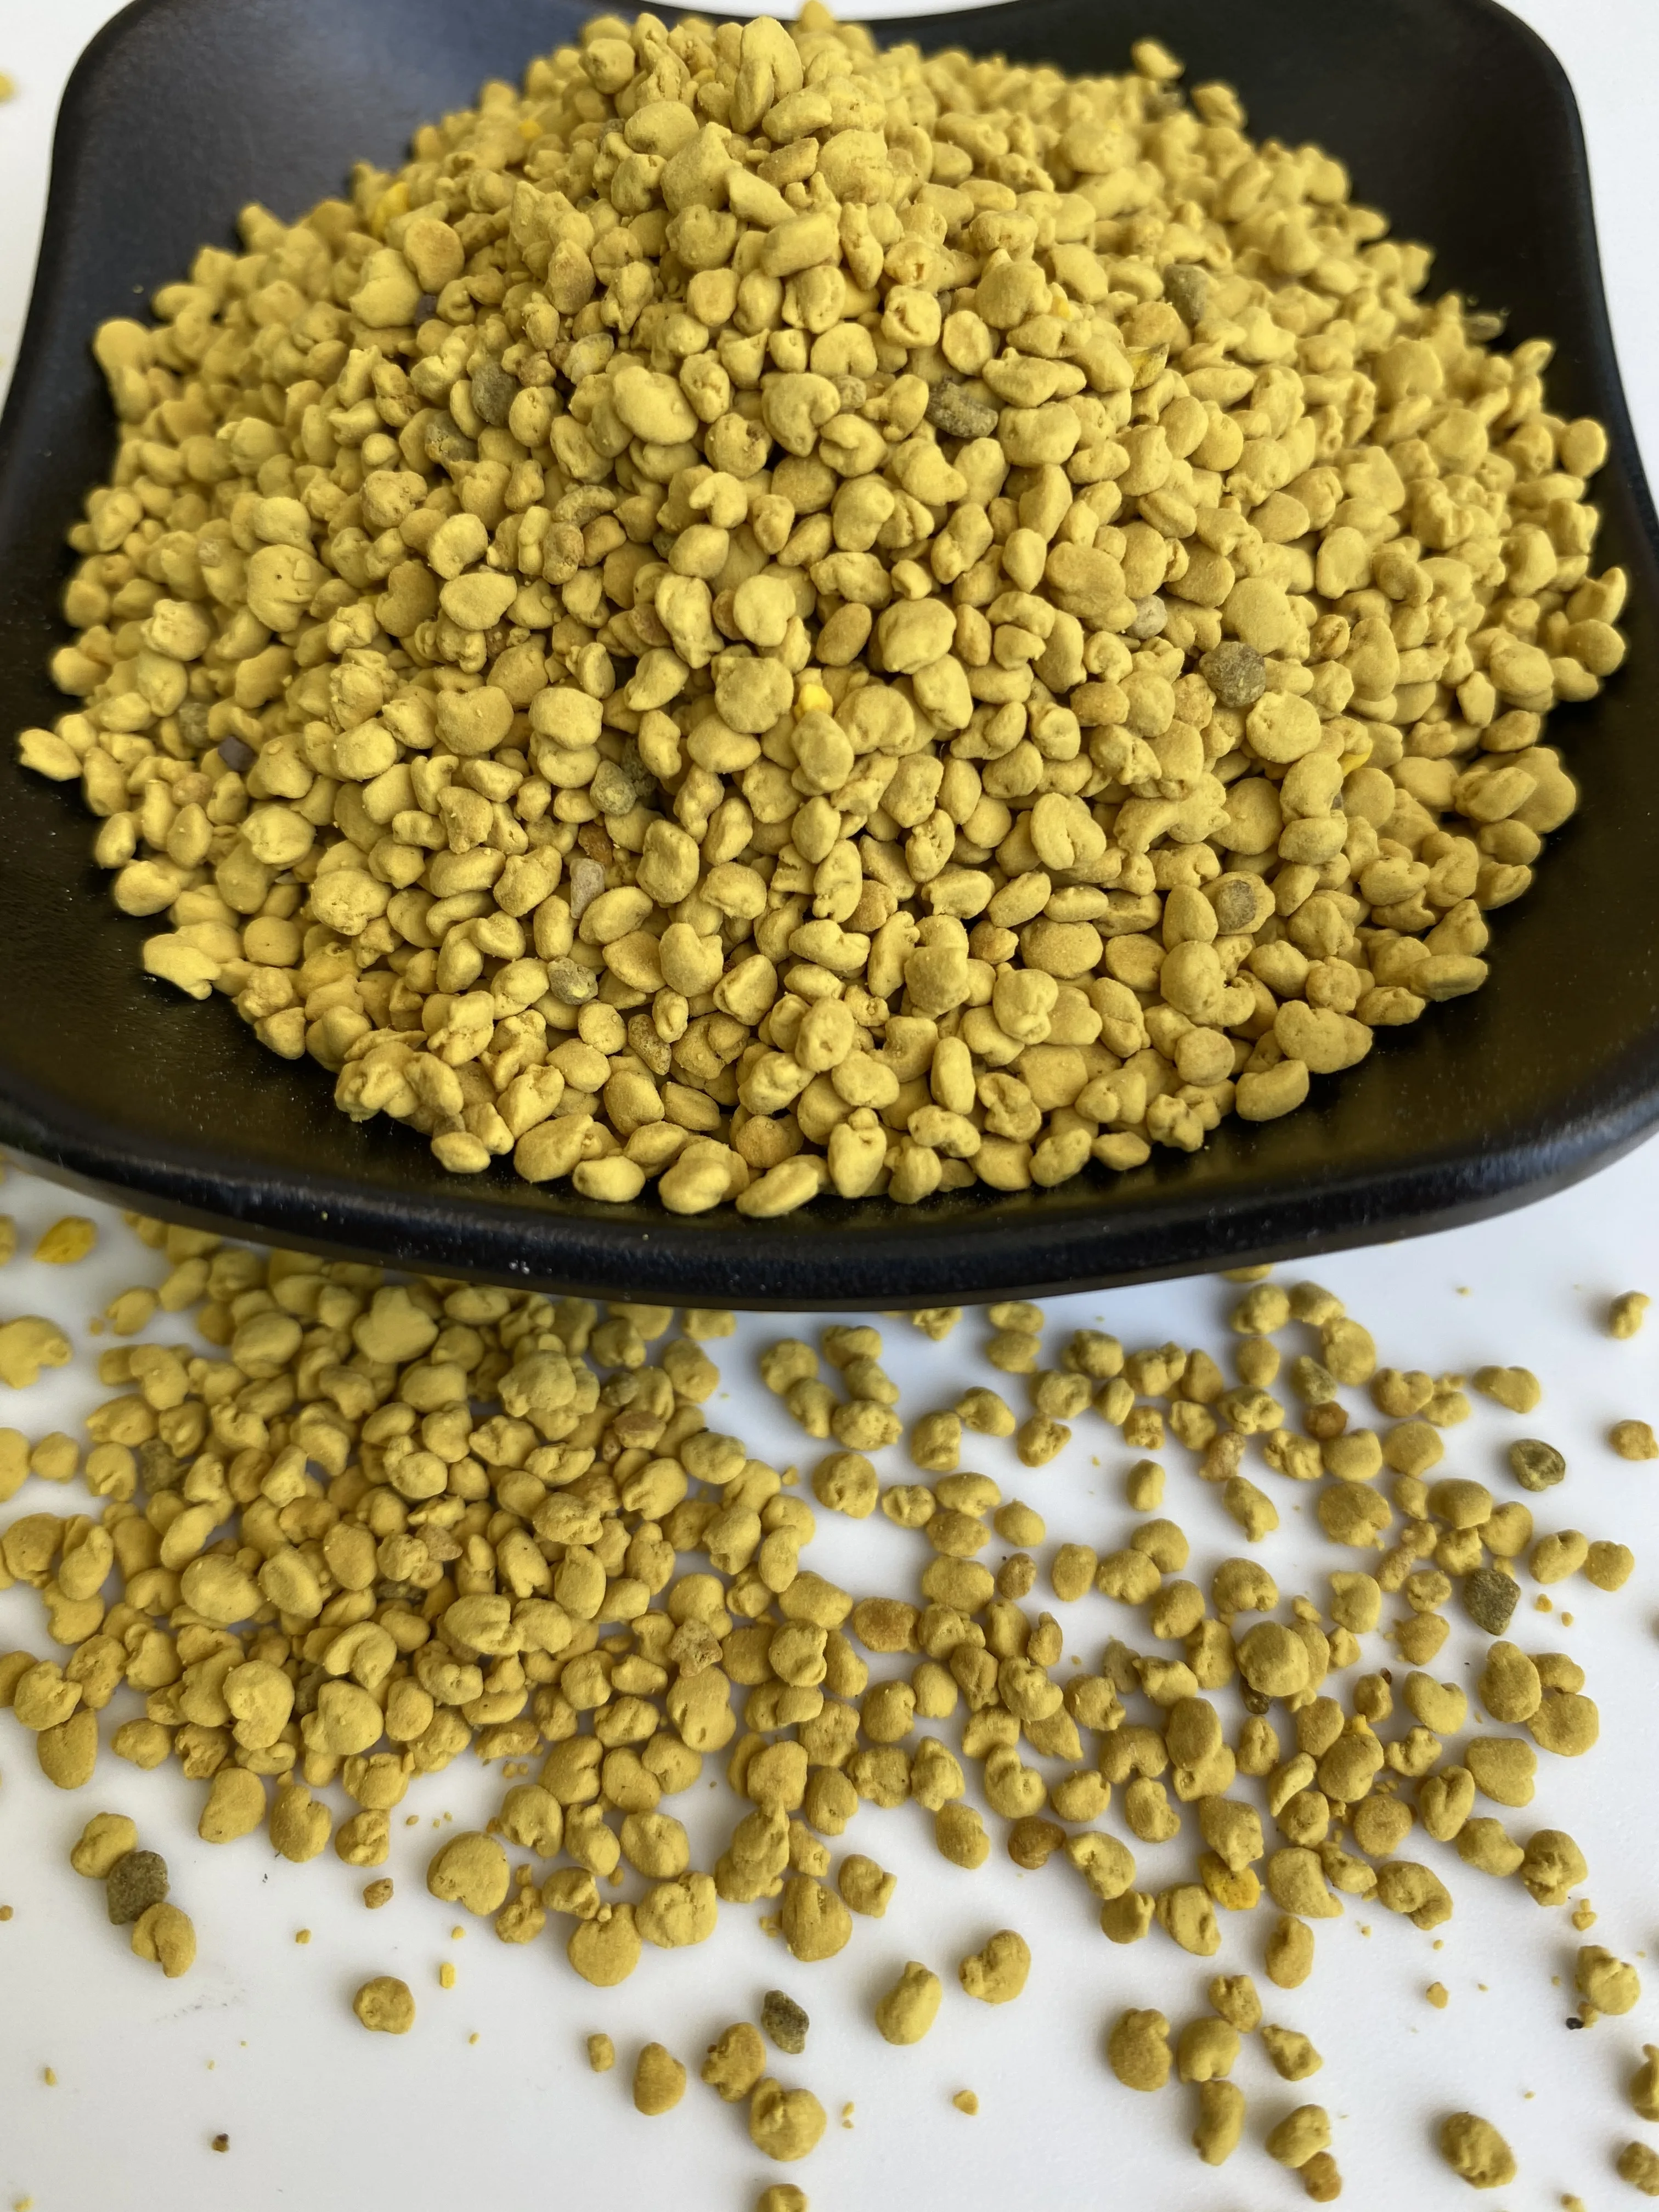 Supplied by Qinghai, China High Quality Rape Bee Pollen